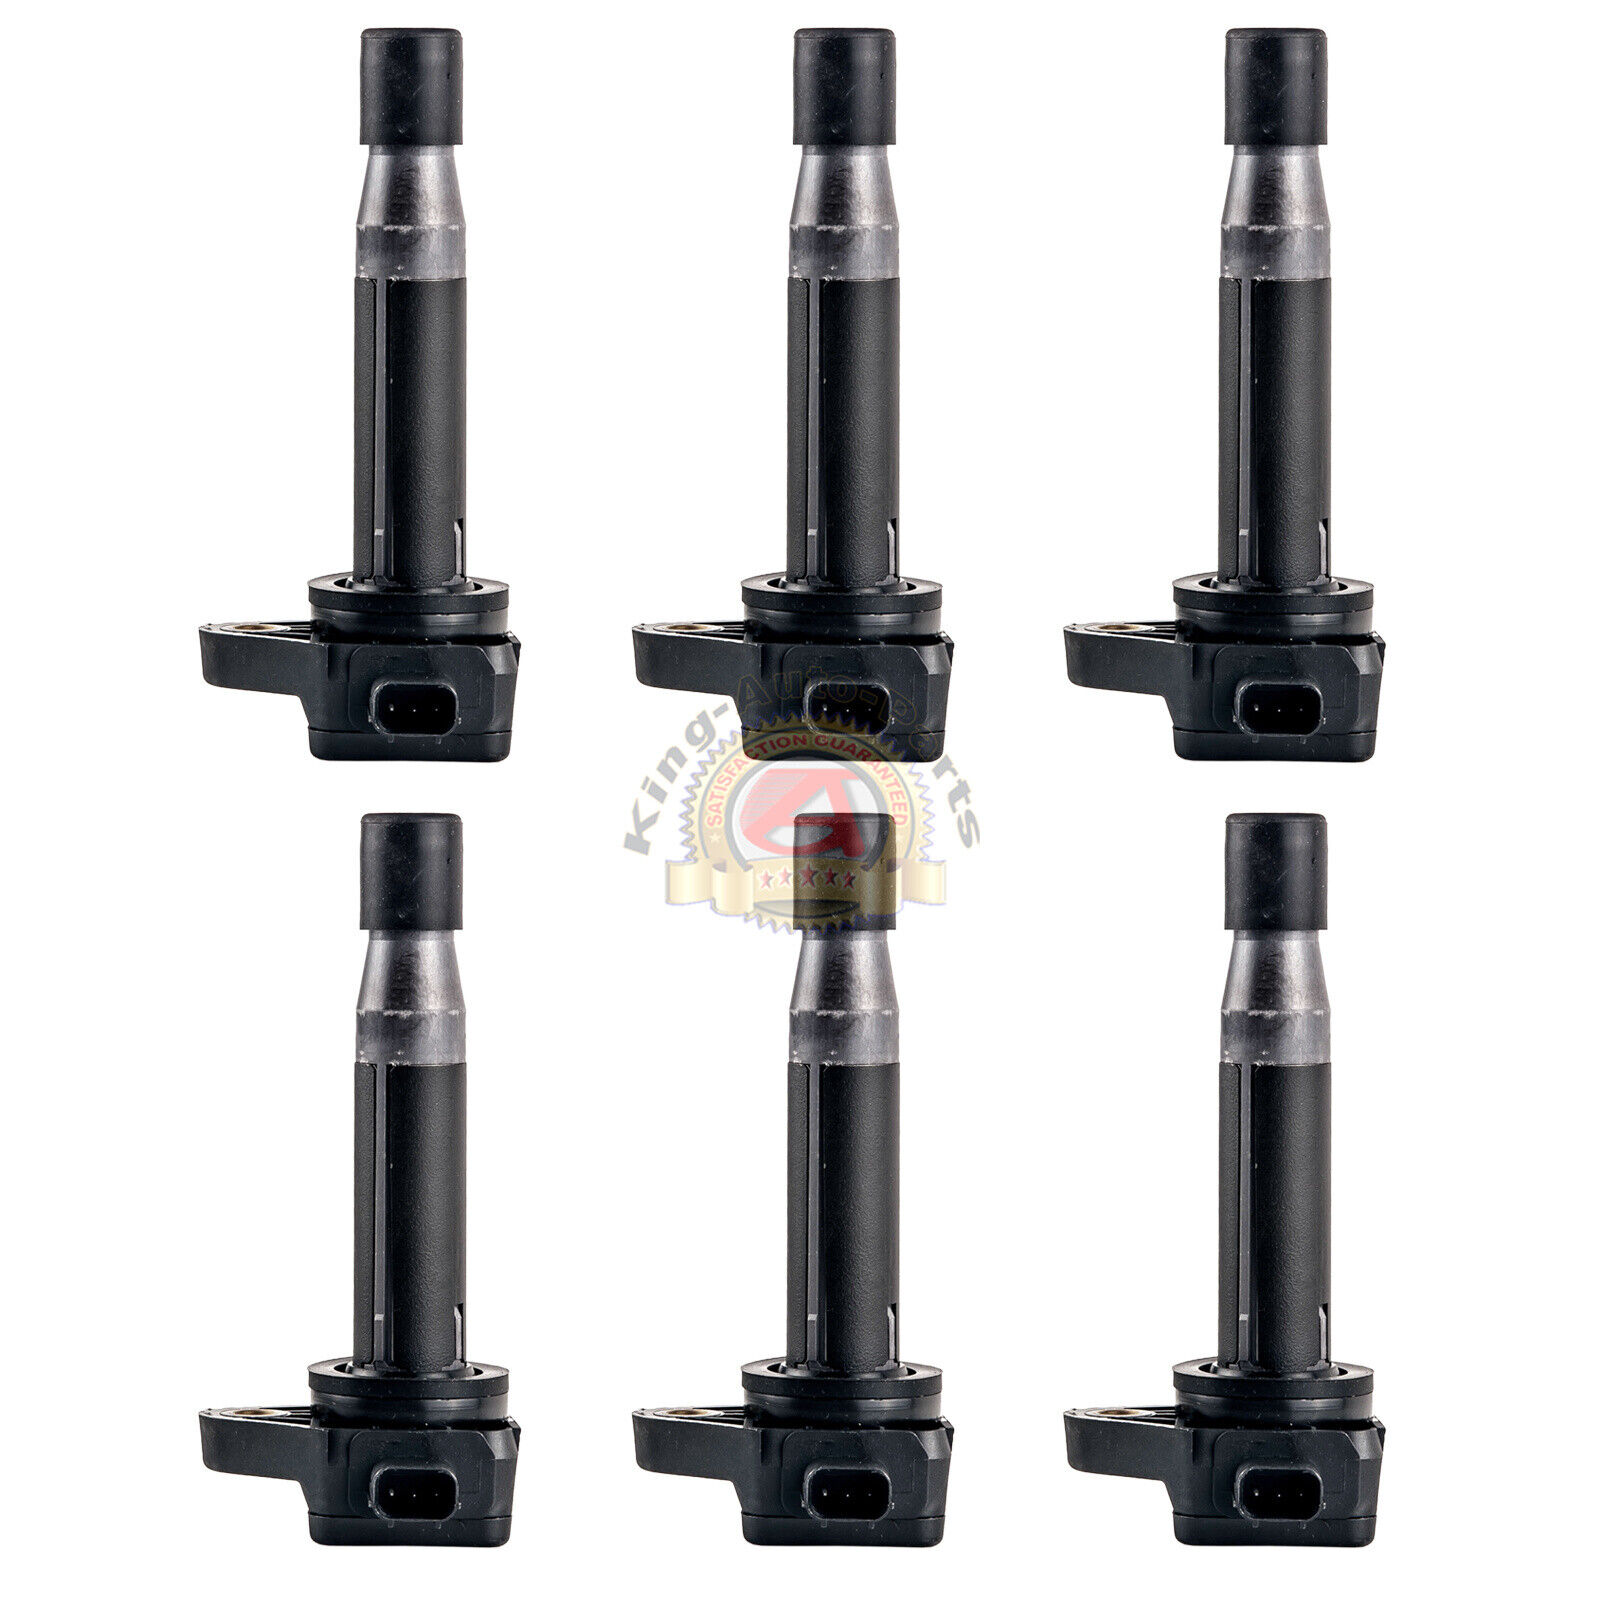 New Ignition Coil Set of 6 for Honda Accord Crosstour Odyssey Acura RL TL TSX